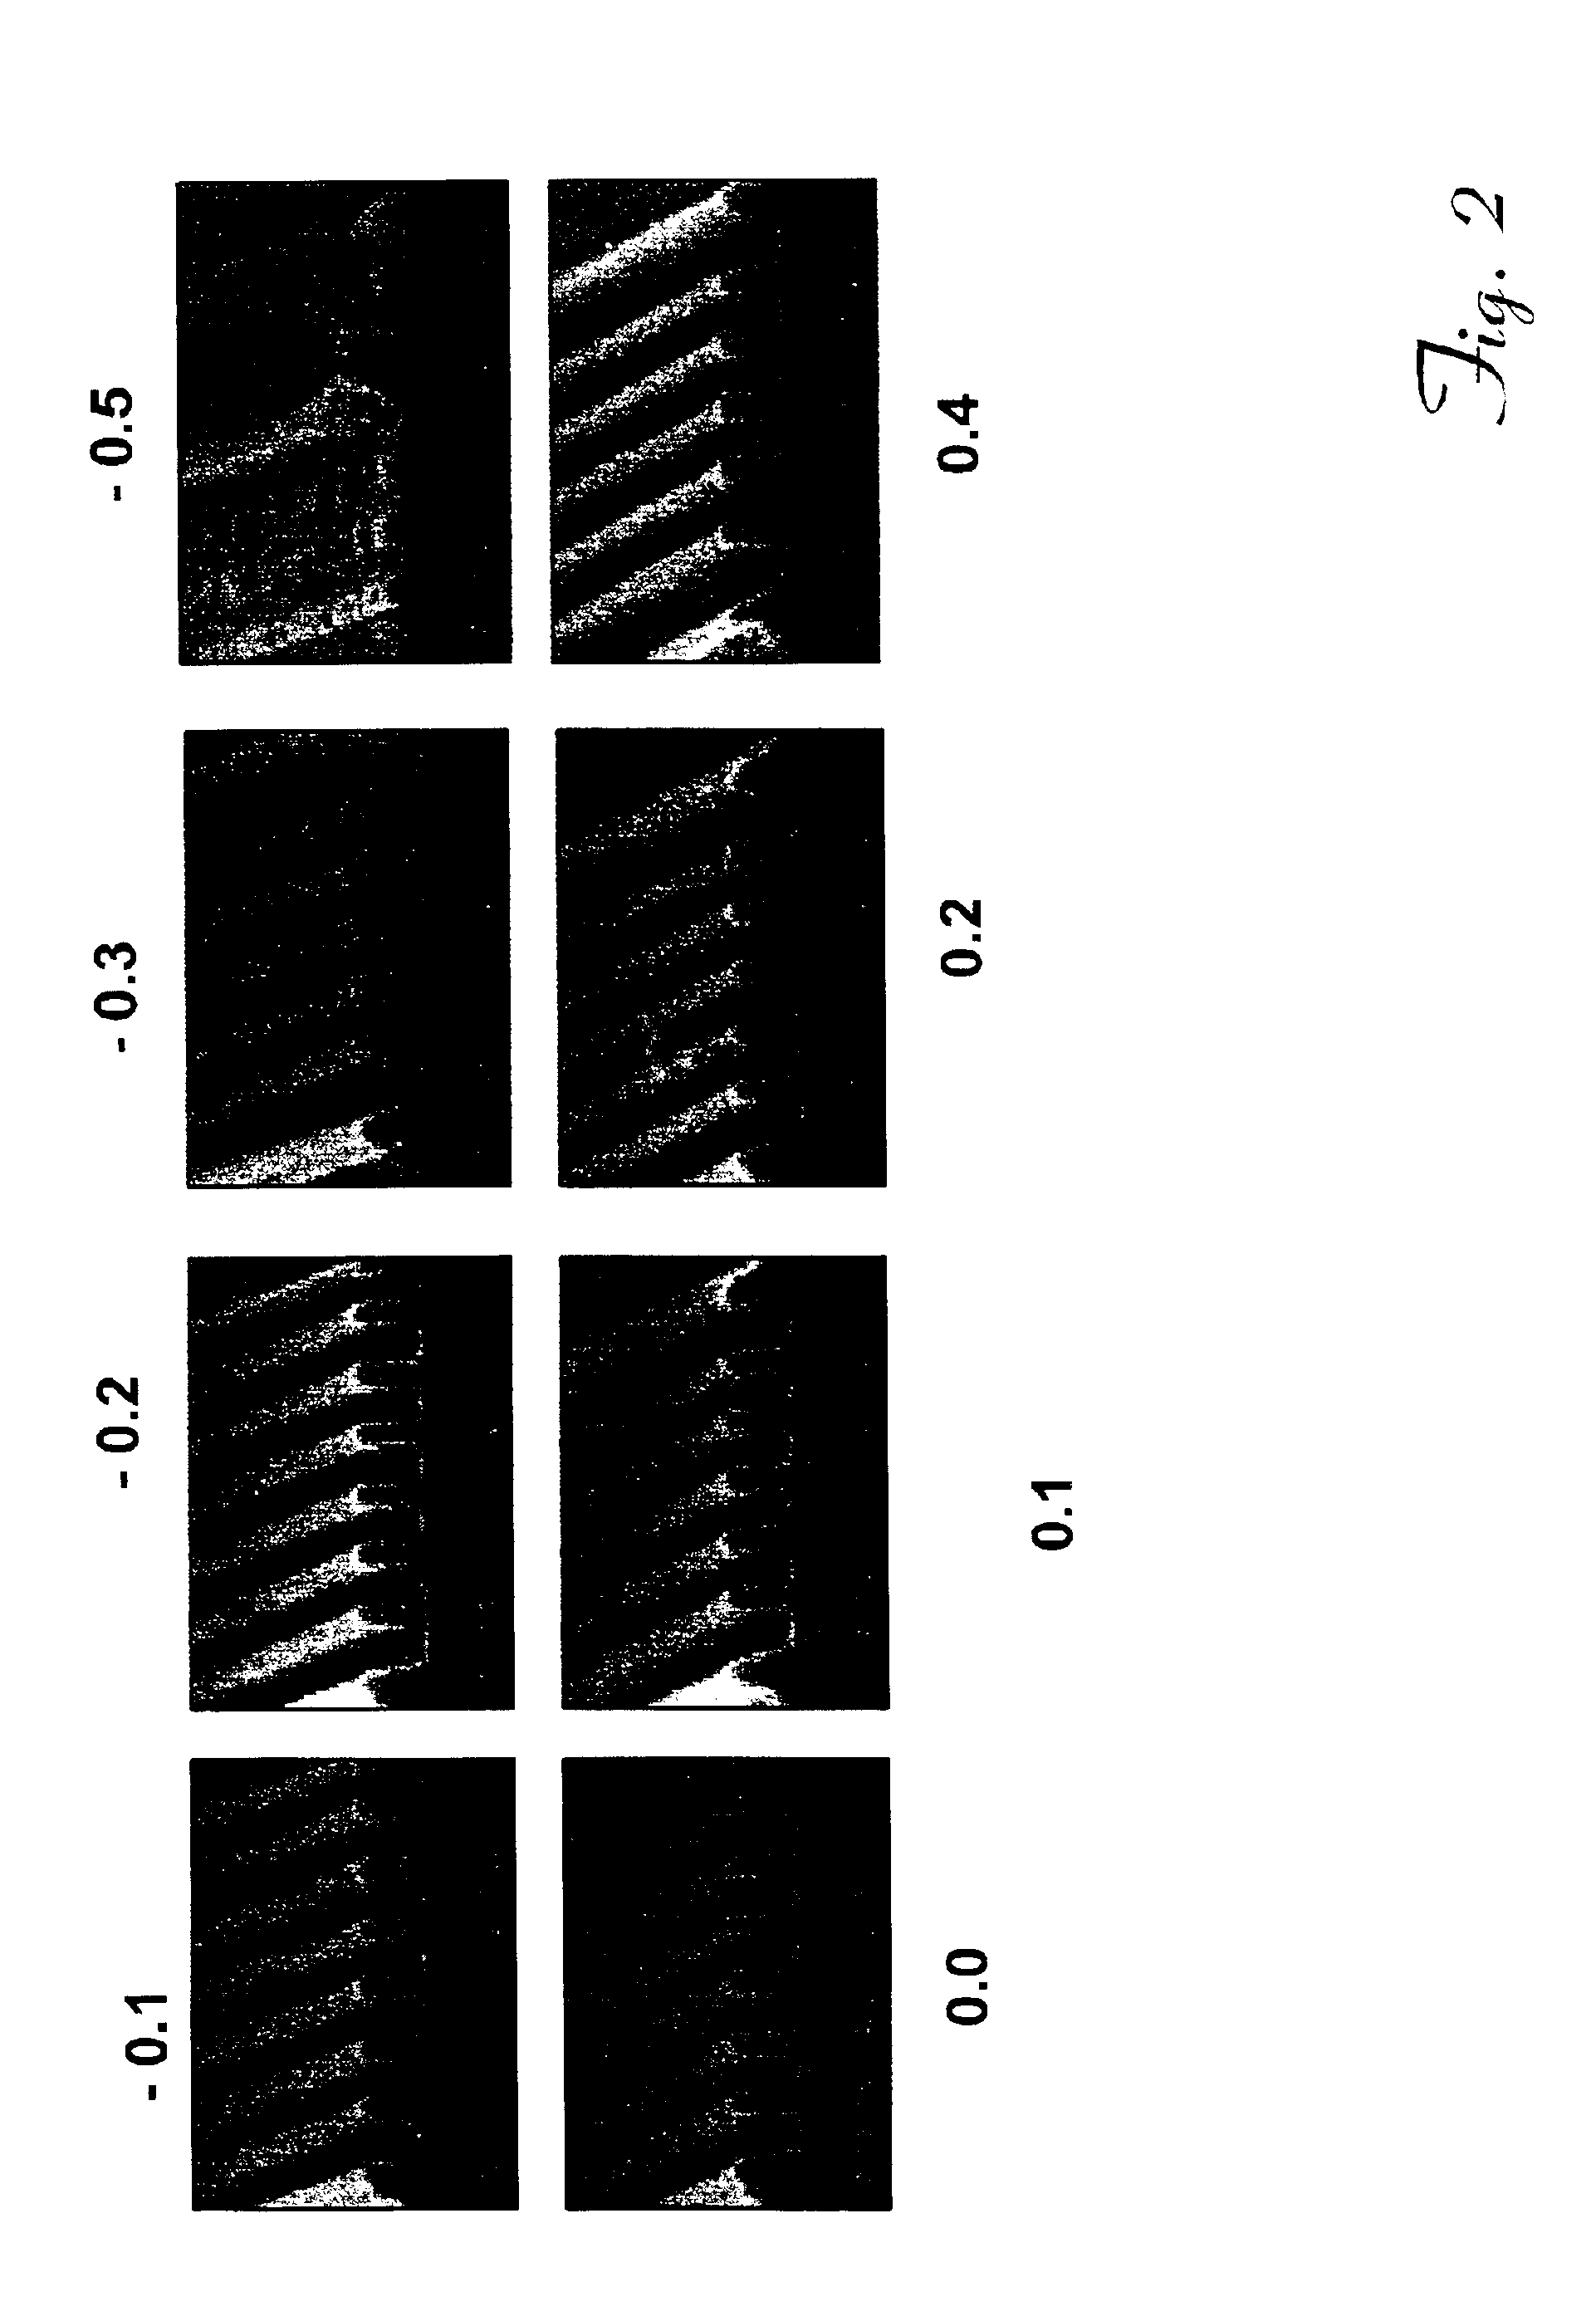 Organic anti-reflective coating compositions for advanced microlithography